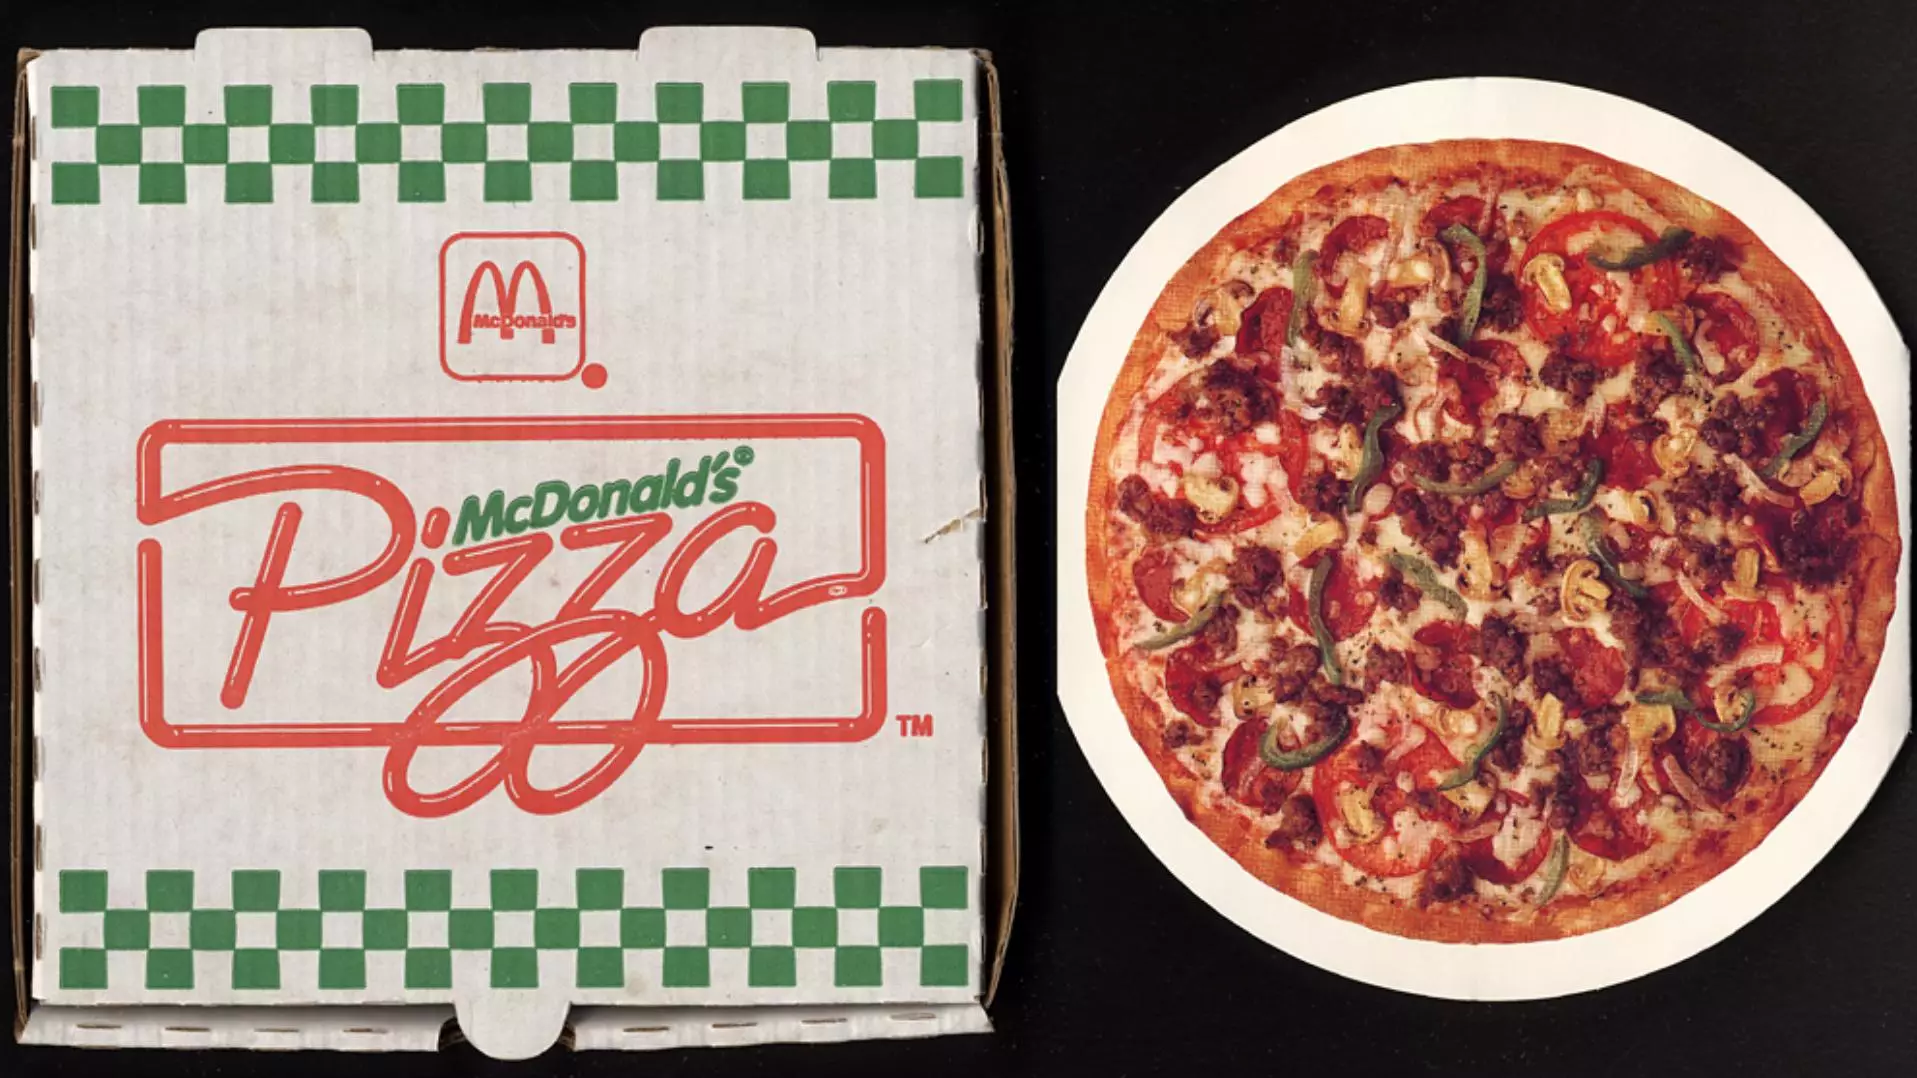 The McDonald's Pizza Is Available In Two Locations And People Are Travelling Miles To Try It